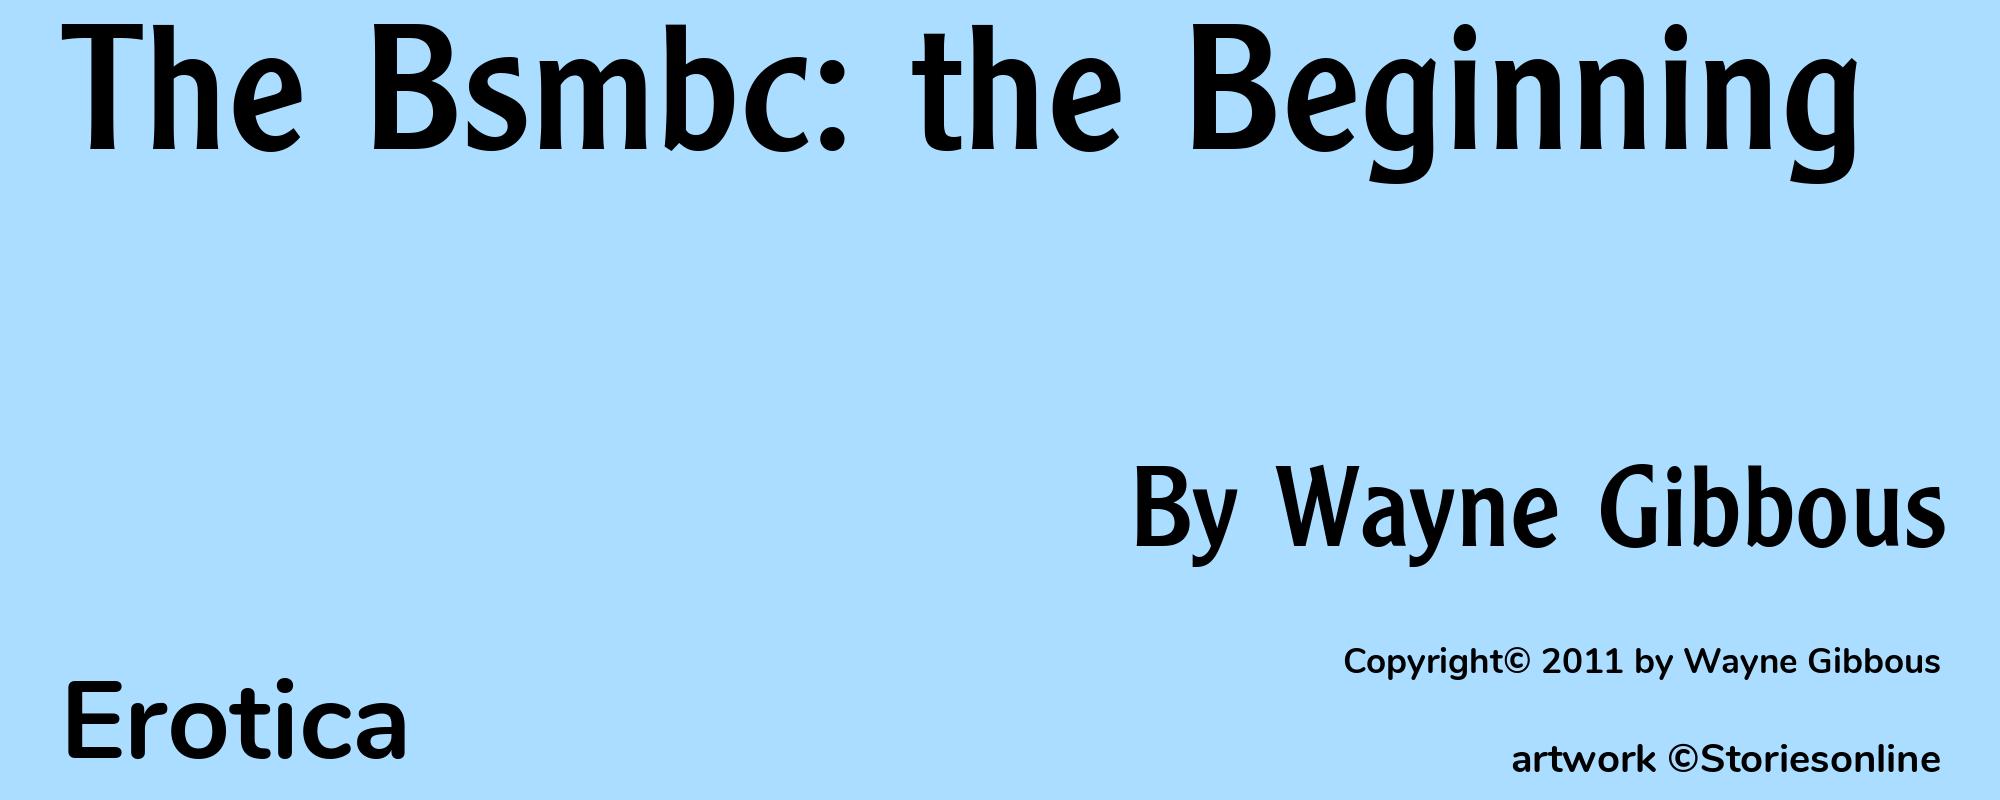 The Bsmbc: the Beginning - Cover